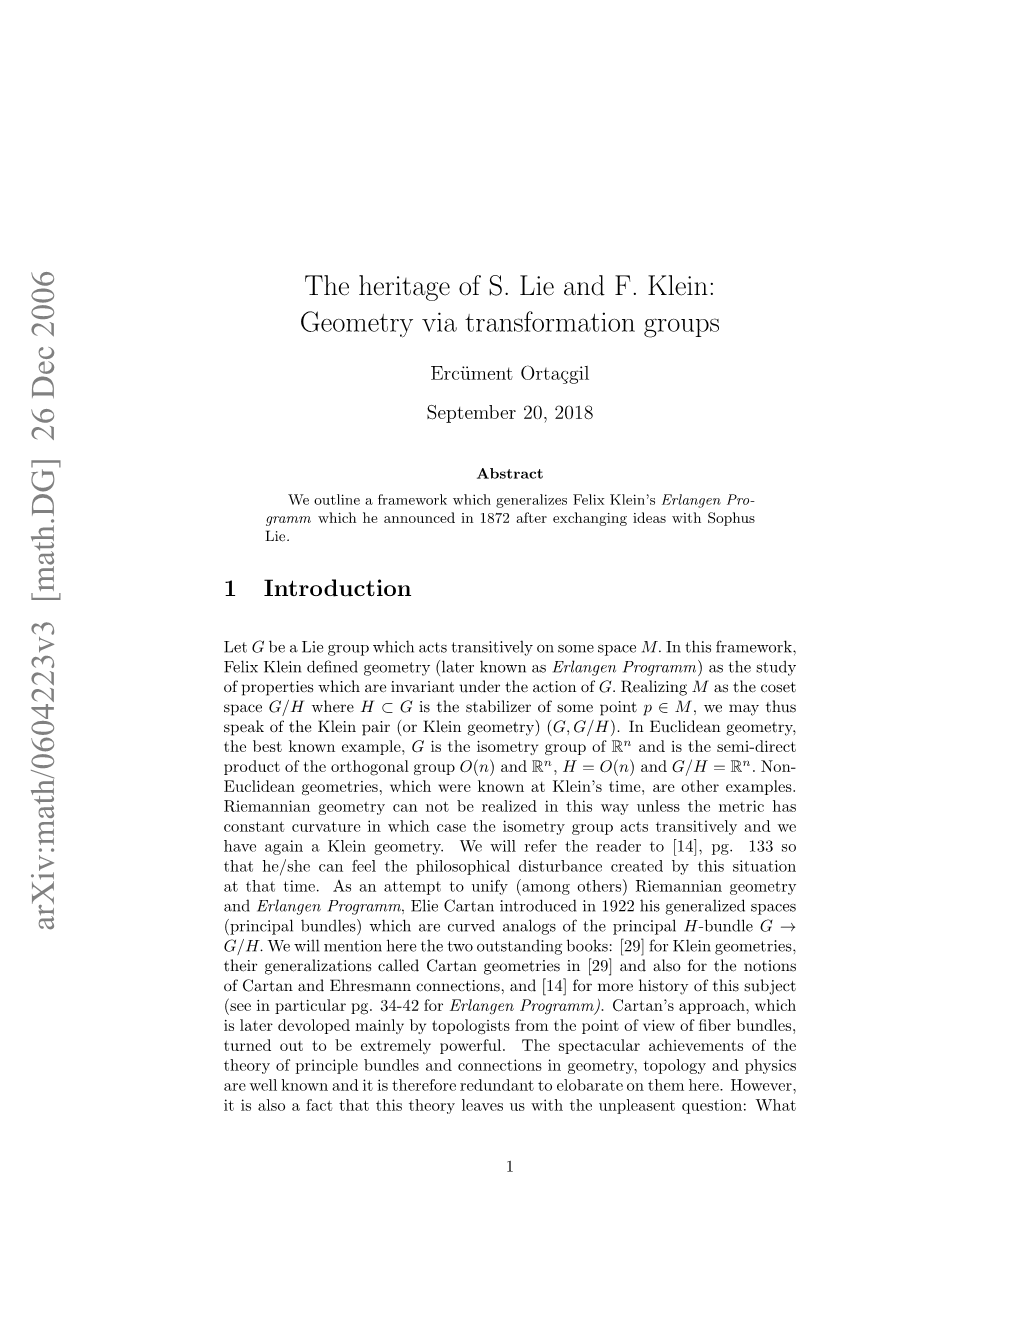 The Heritage of S. Lie and F. Klein: Geometry Via Transformation Groups